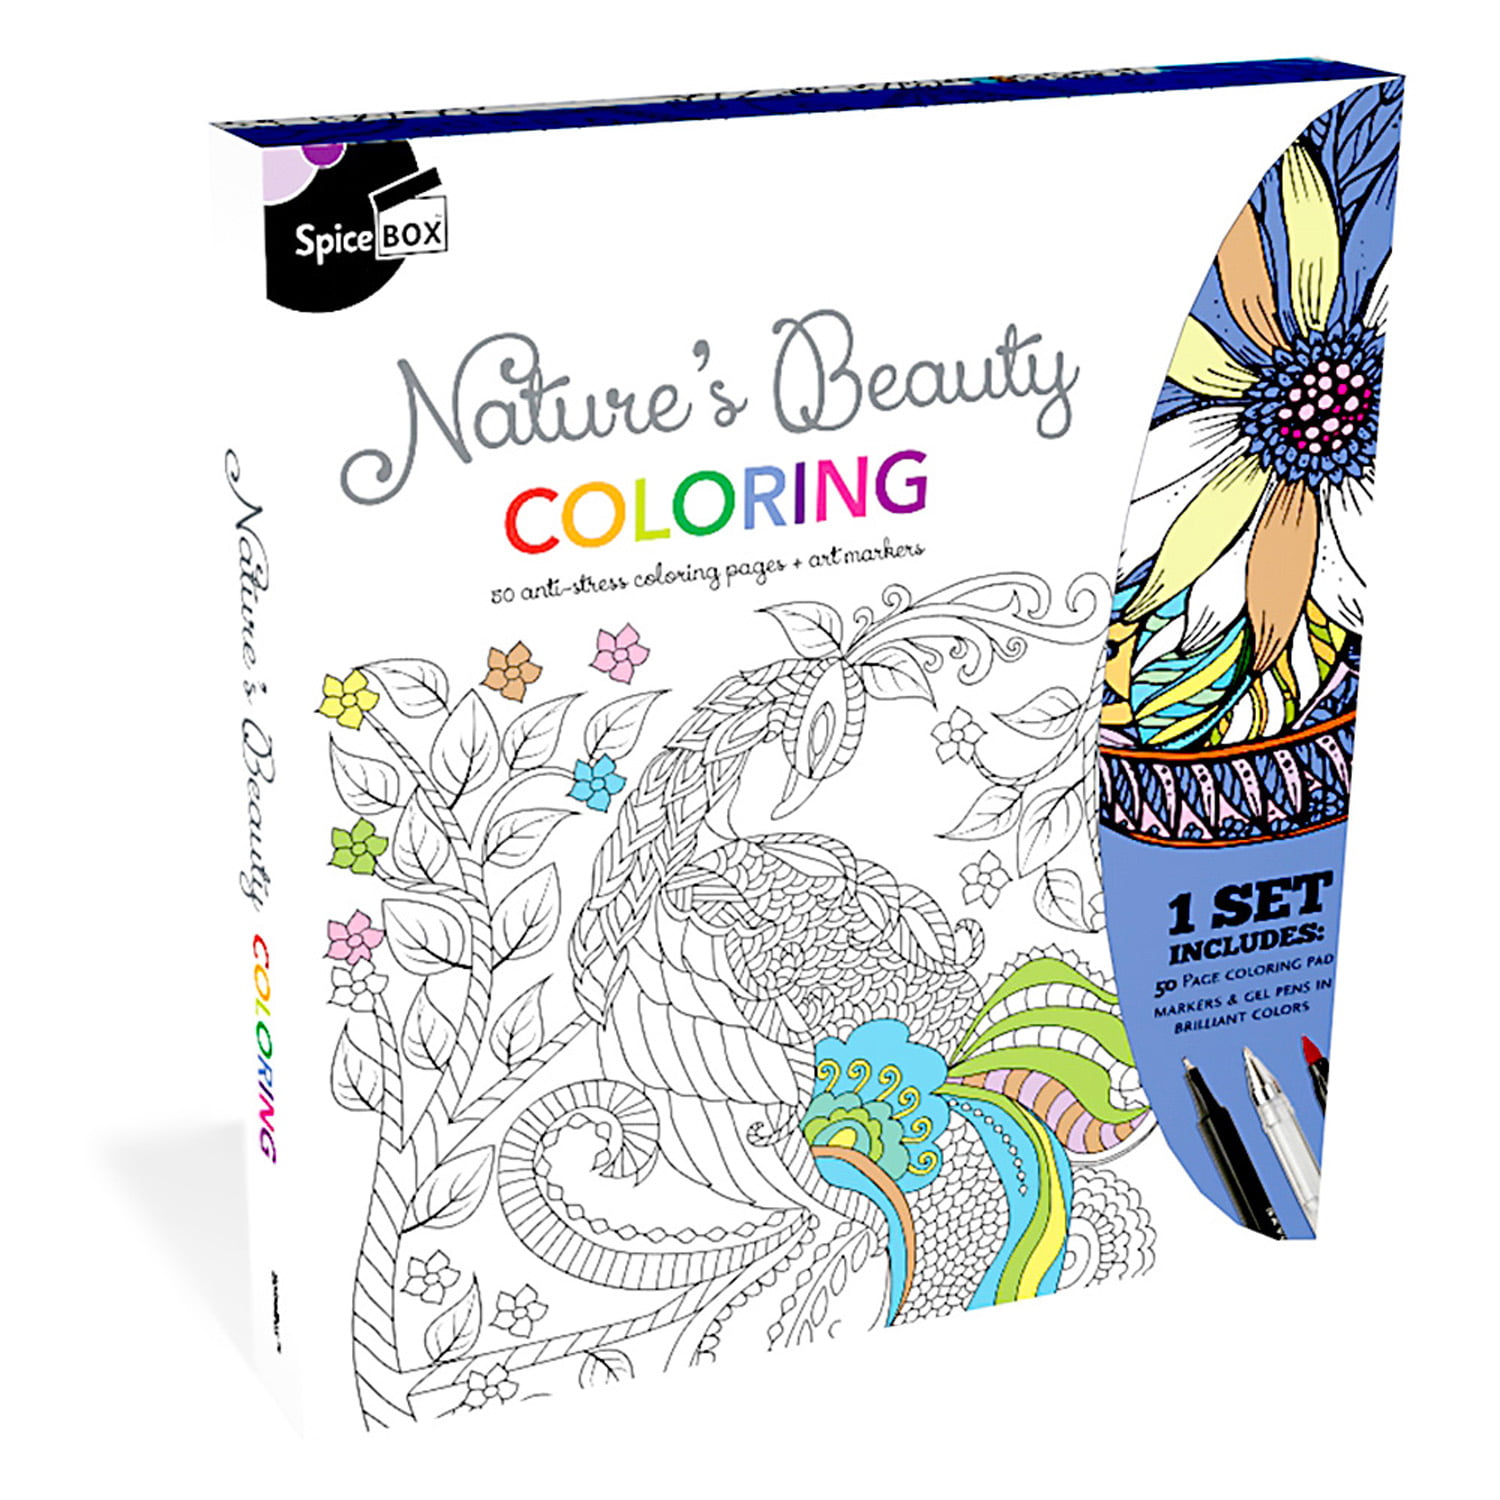 SpiceBox Meditation Paisley and Floral Coloring Book Set, Calming Relaxing  Mindfulness Meditative Kit with Markers and Gel Pens, Art Craft Hobby Kits